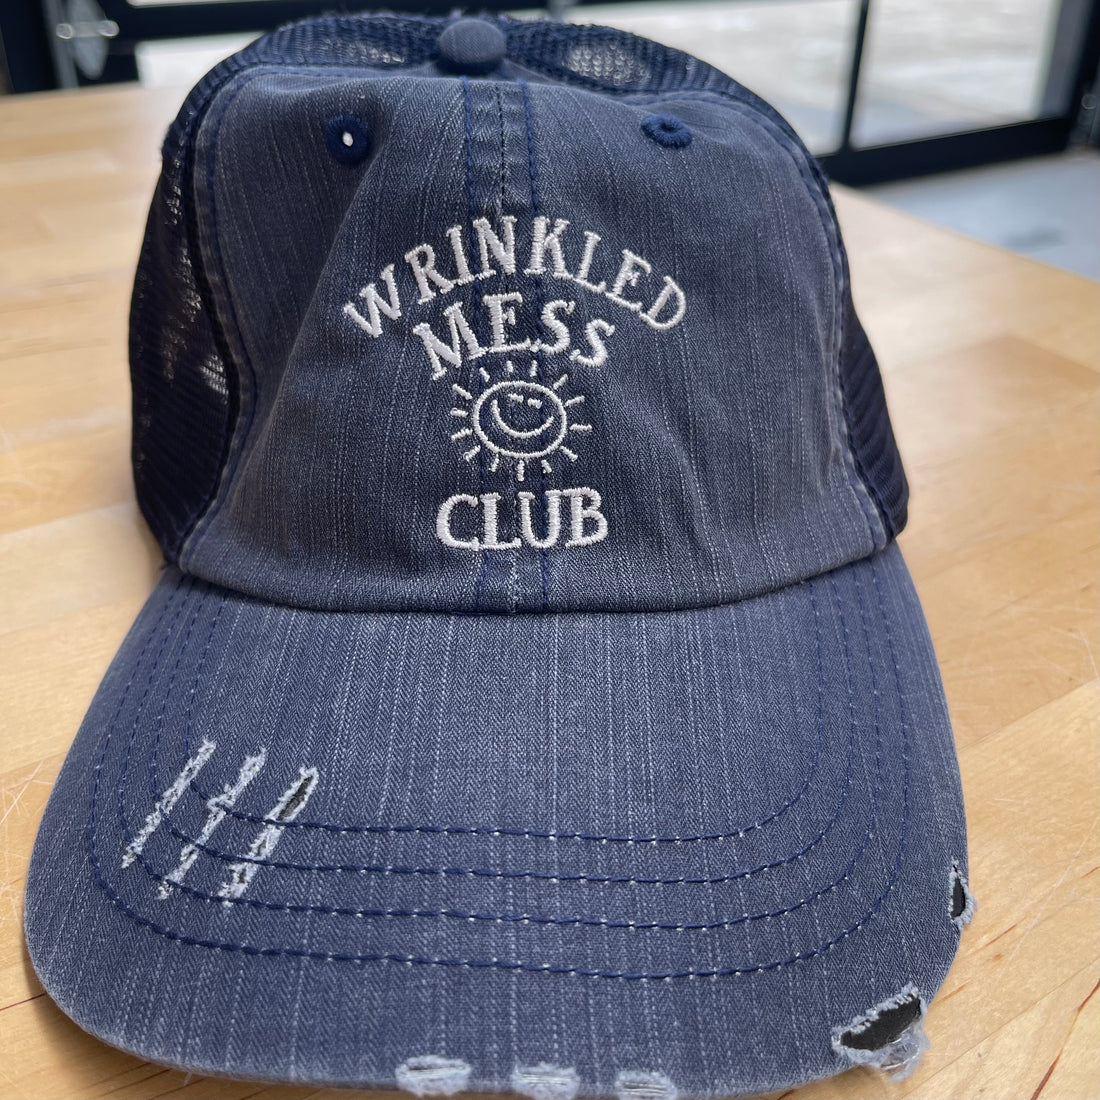 Wrinkled Mess Club Hat: Distressed for a vintage look, this navy blue hat is embroidered with Wrinkled Mess Club on the front and Be Kind to Everyone® with Jordyn&